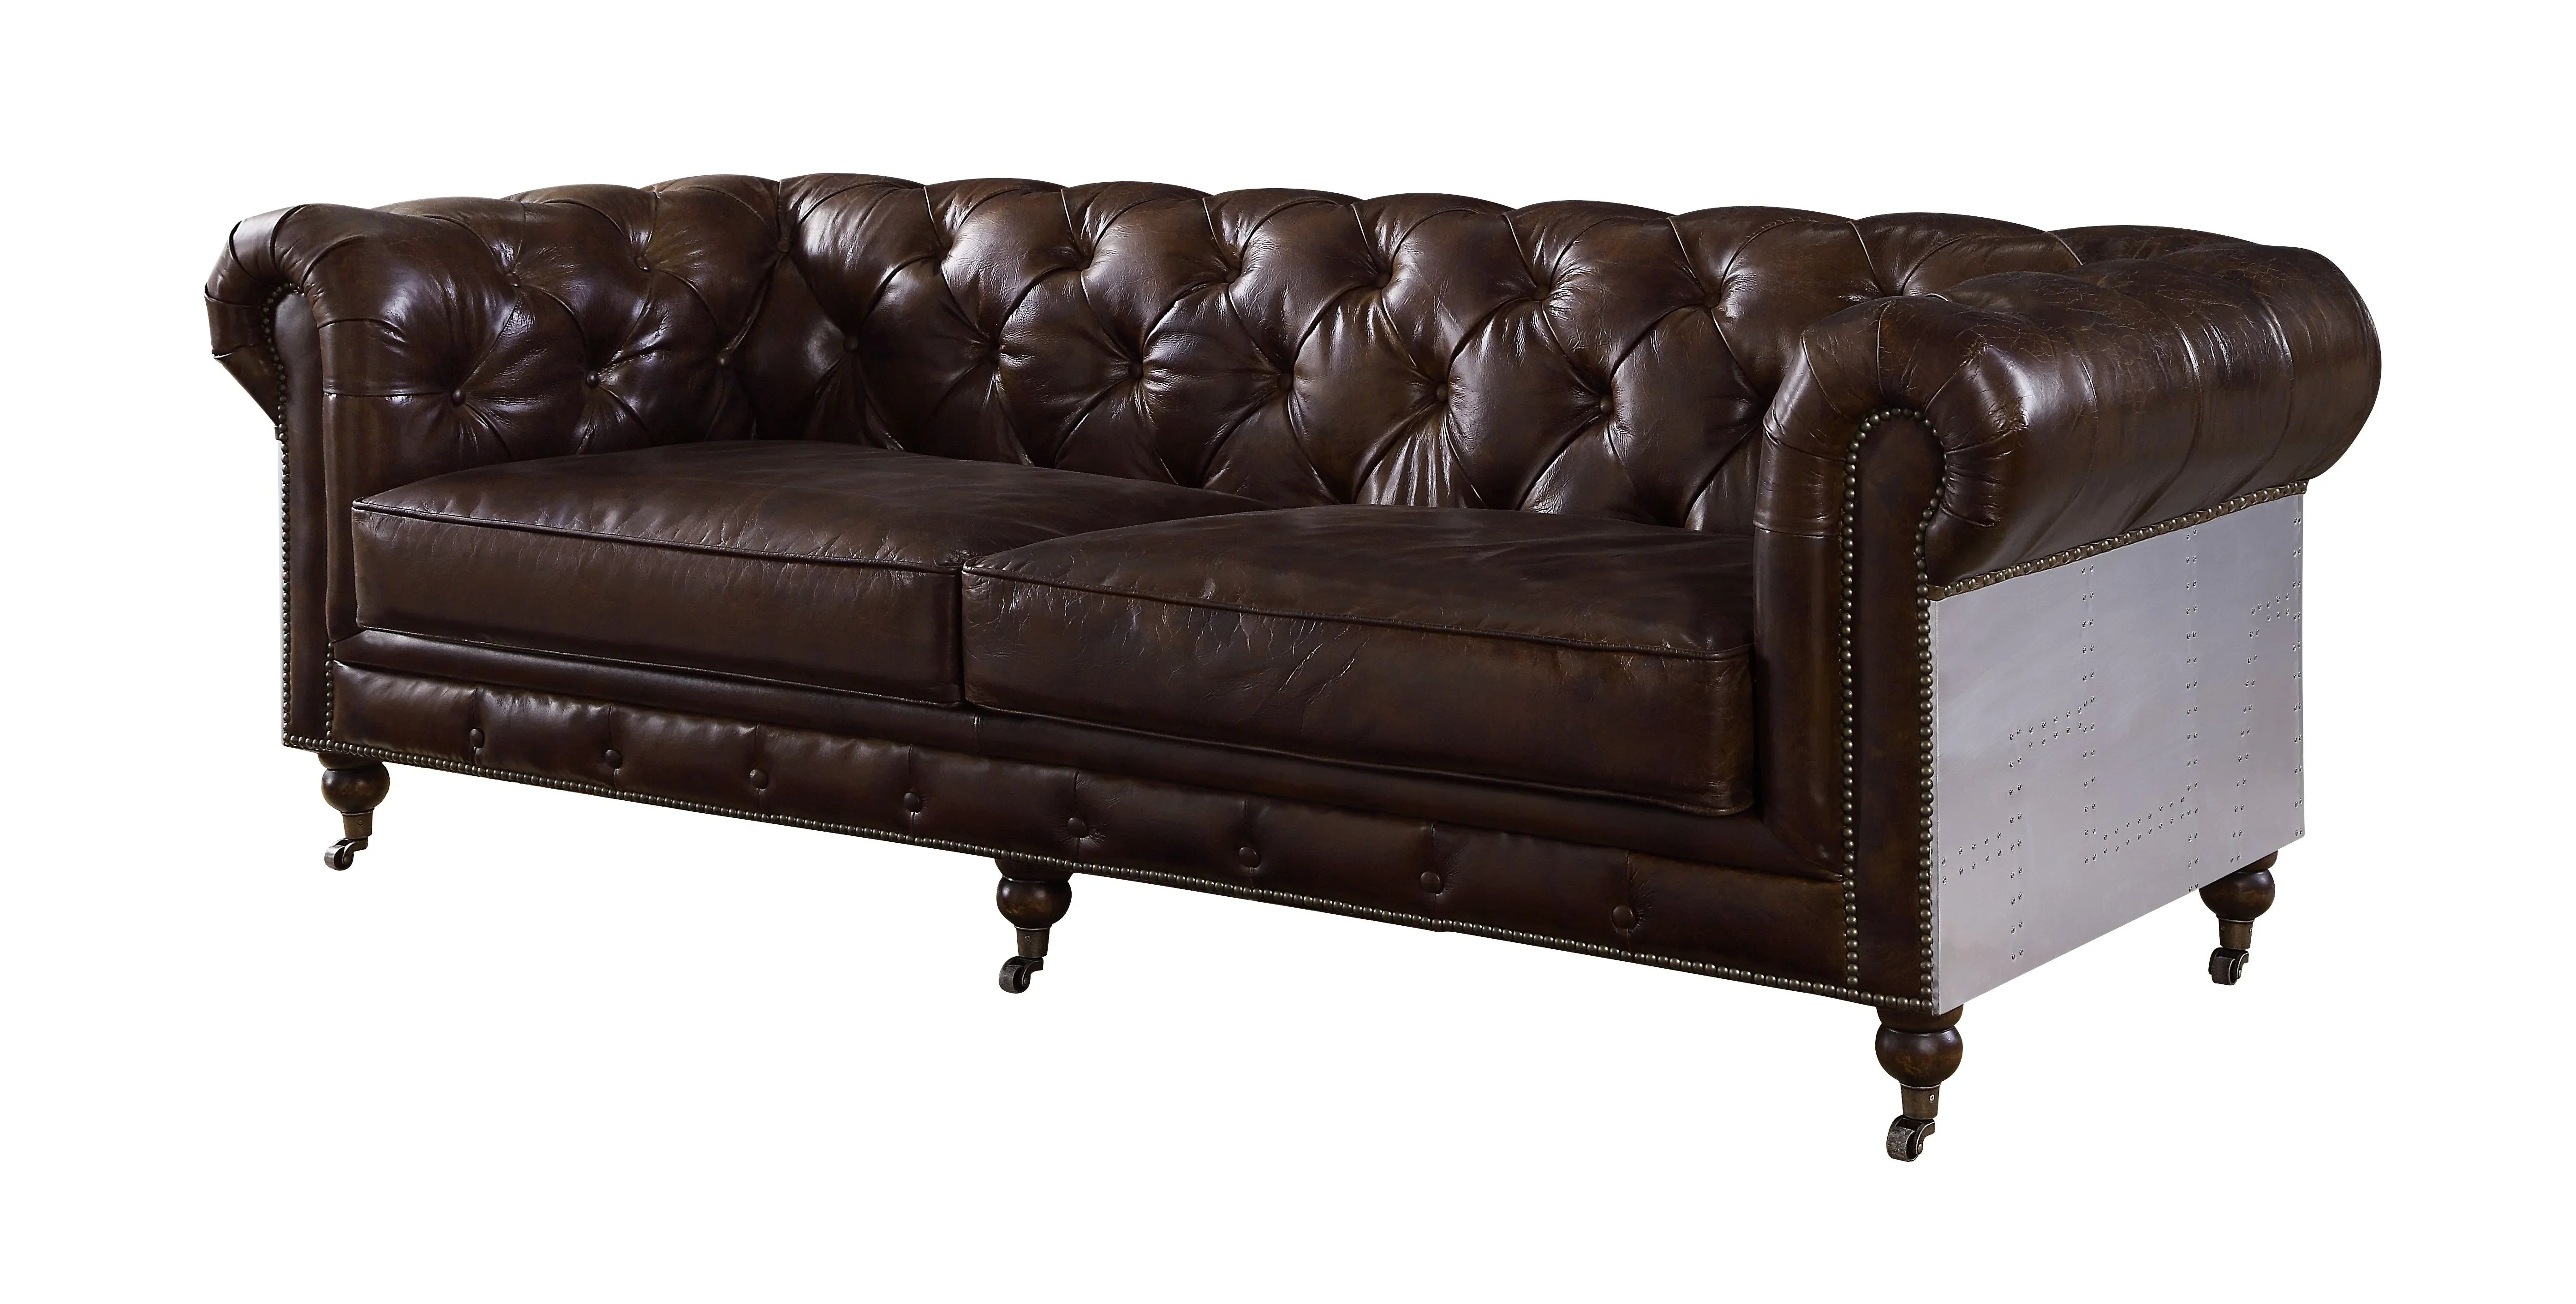 Aberdeen Vintage Brown Top Grain Leather Sofa Model 56590 By ACME Furniture